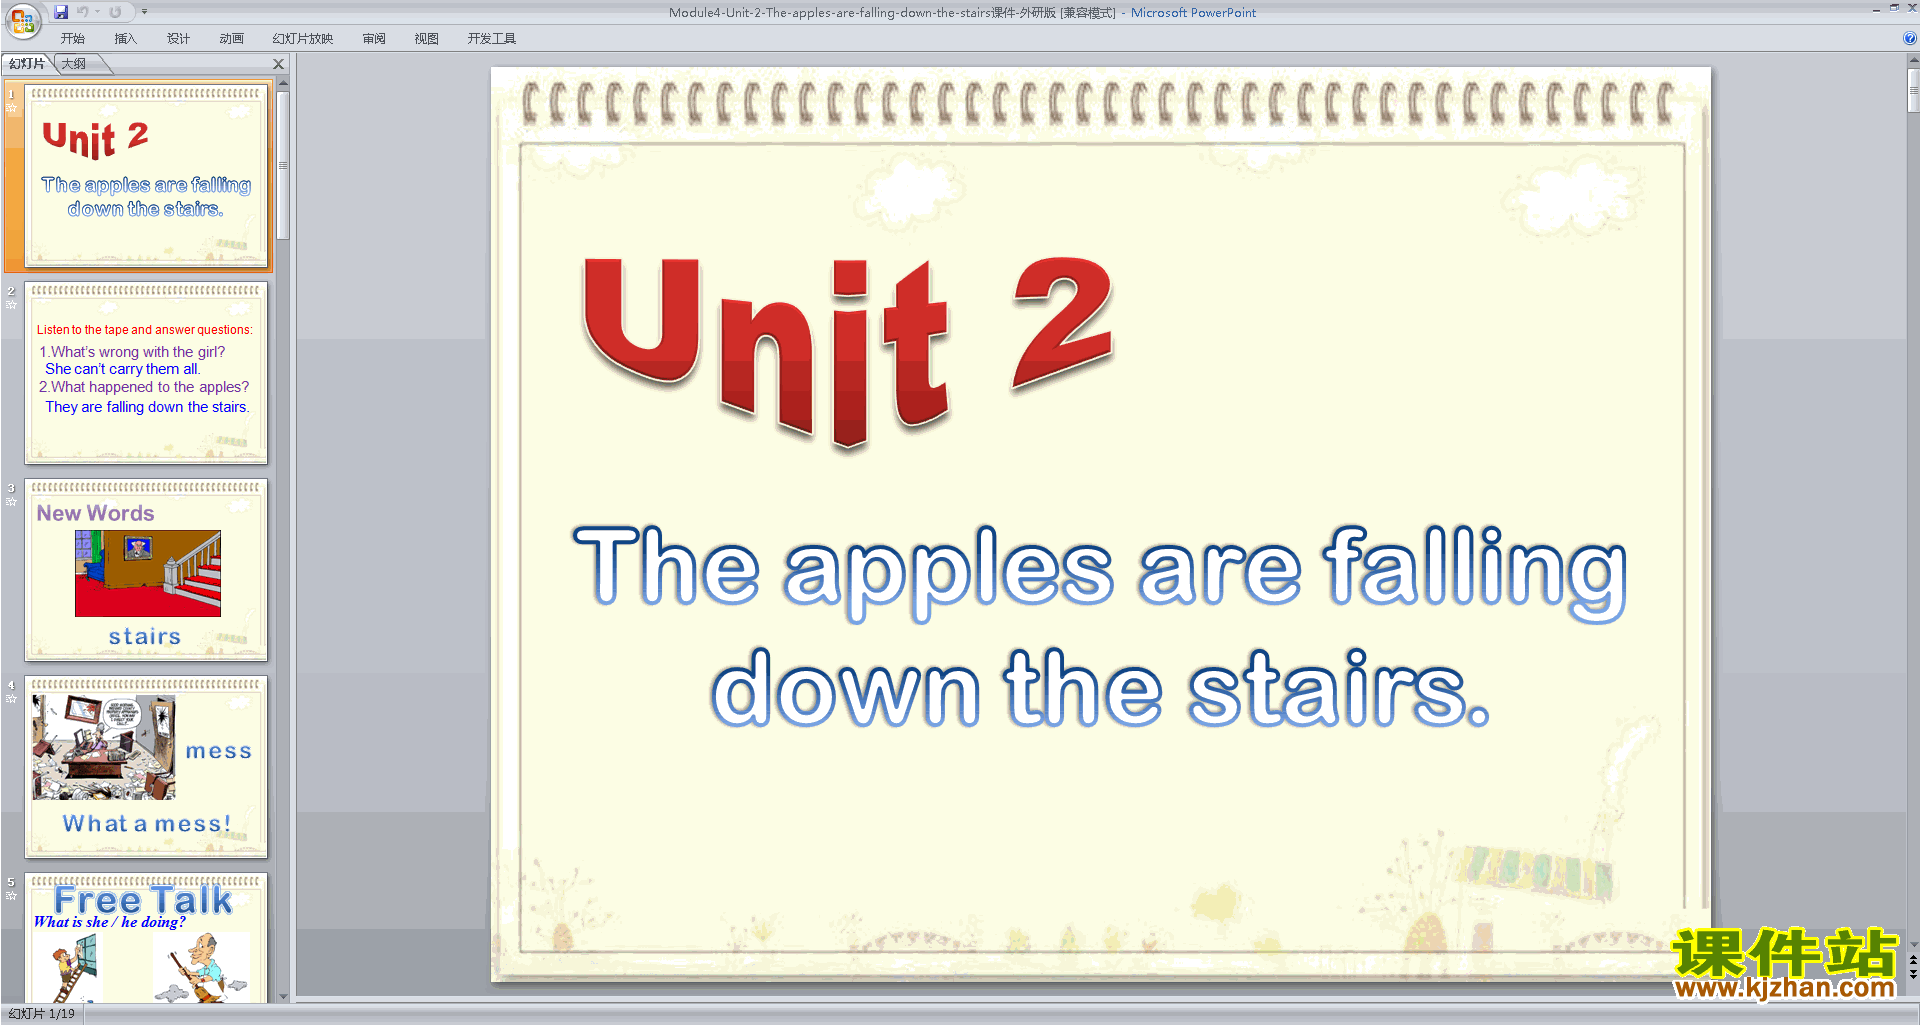 ӢThe apples are falling down the stairspptμ